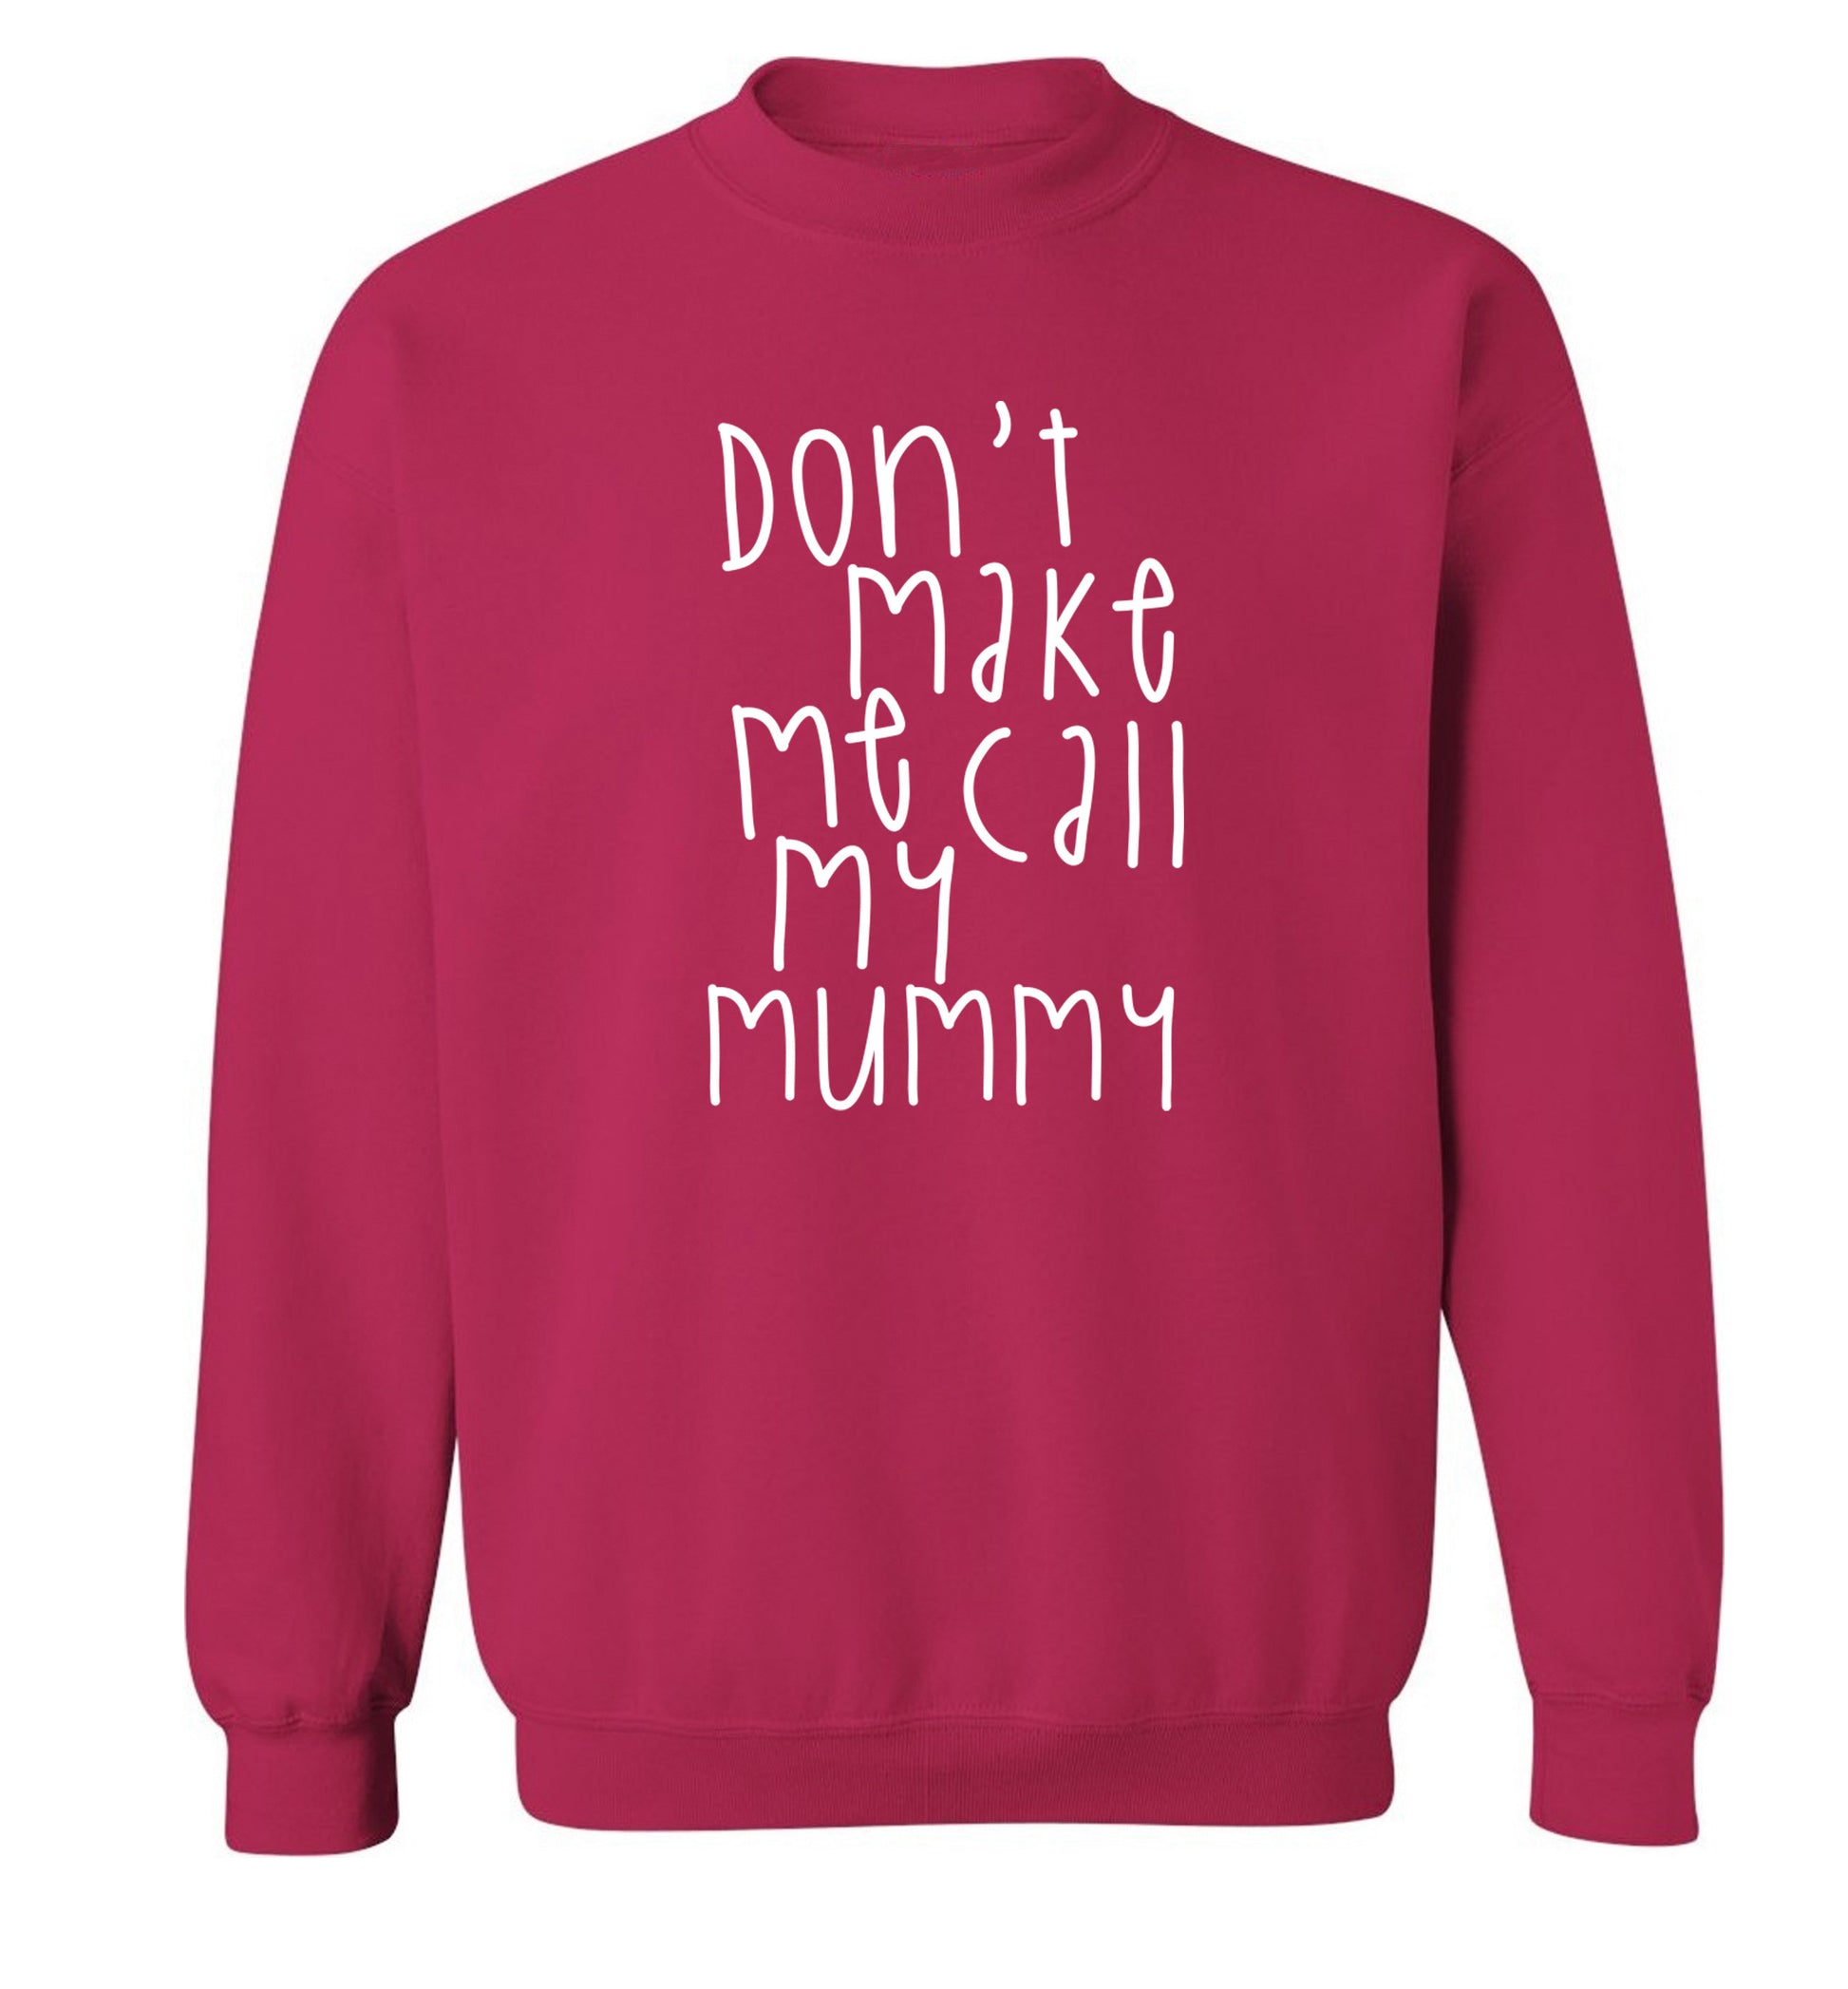 Don't make me call my mummy Adult's unisex pink Sweater 2XL